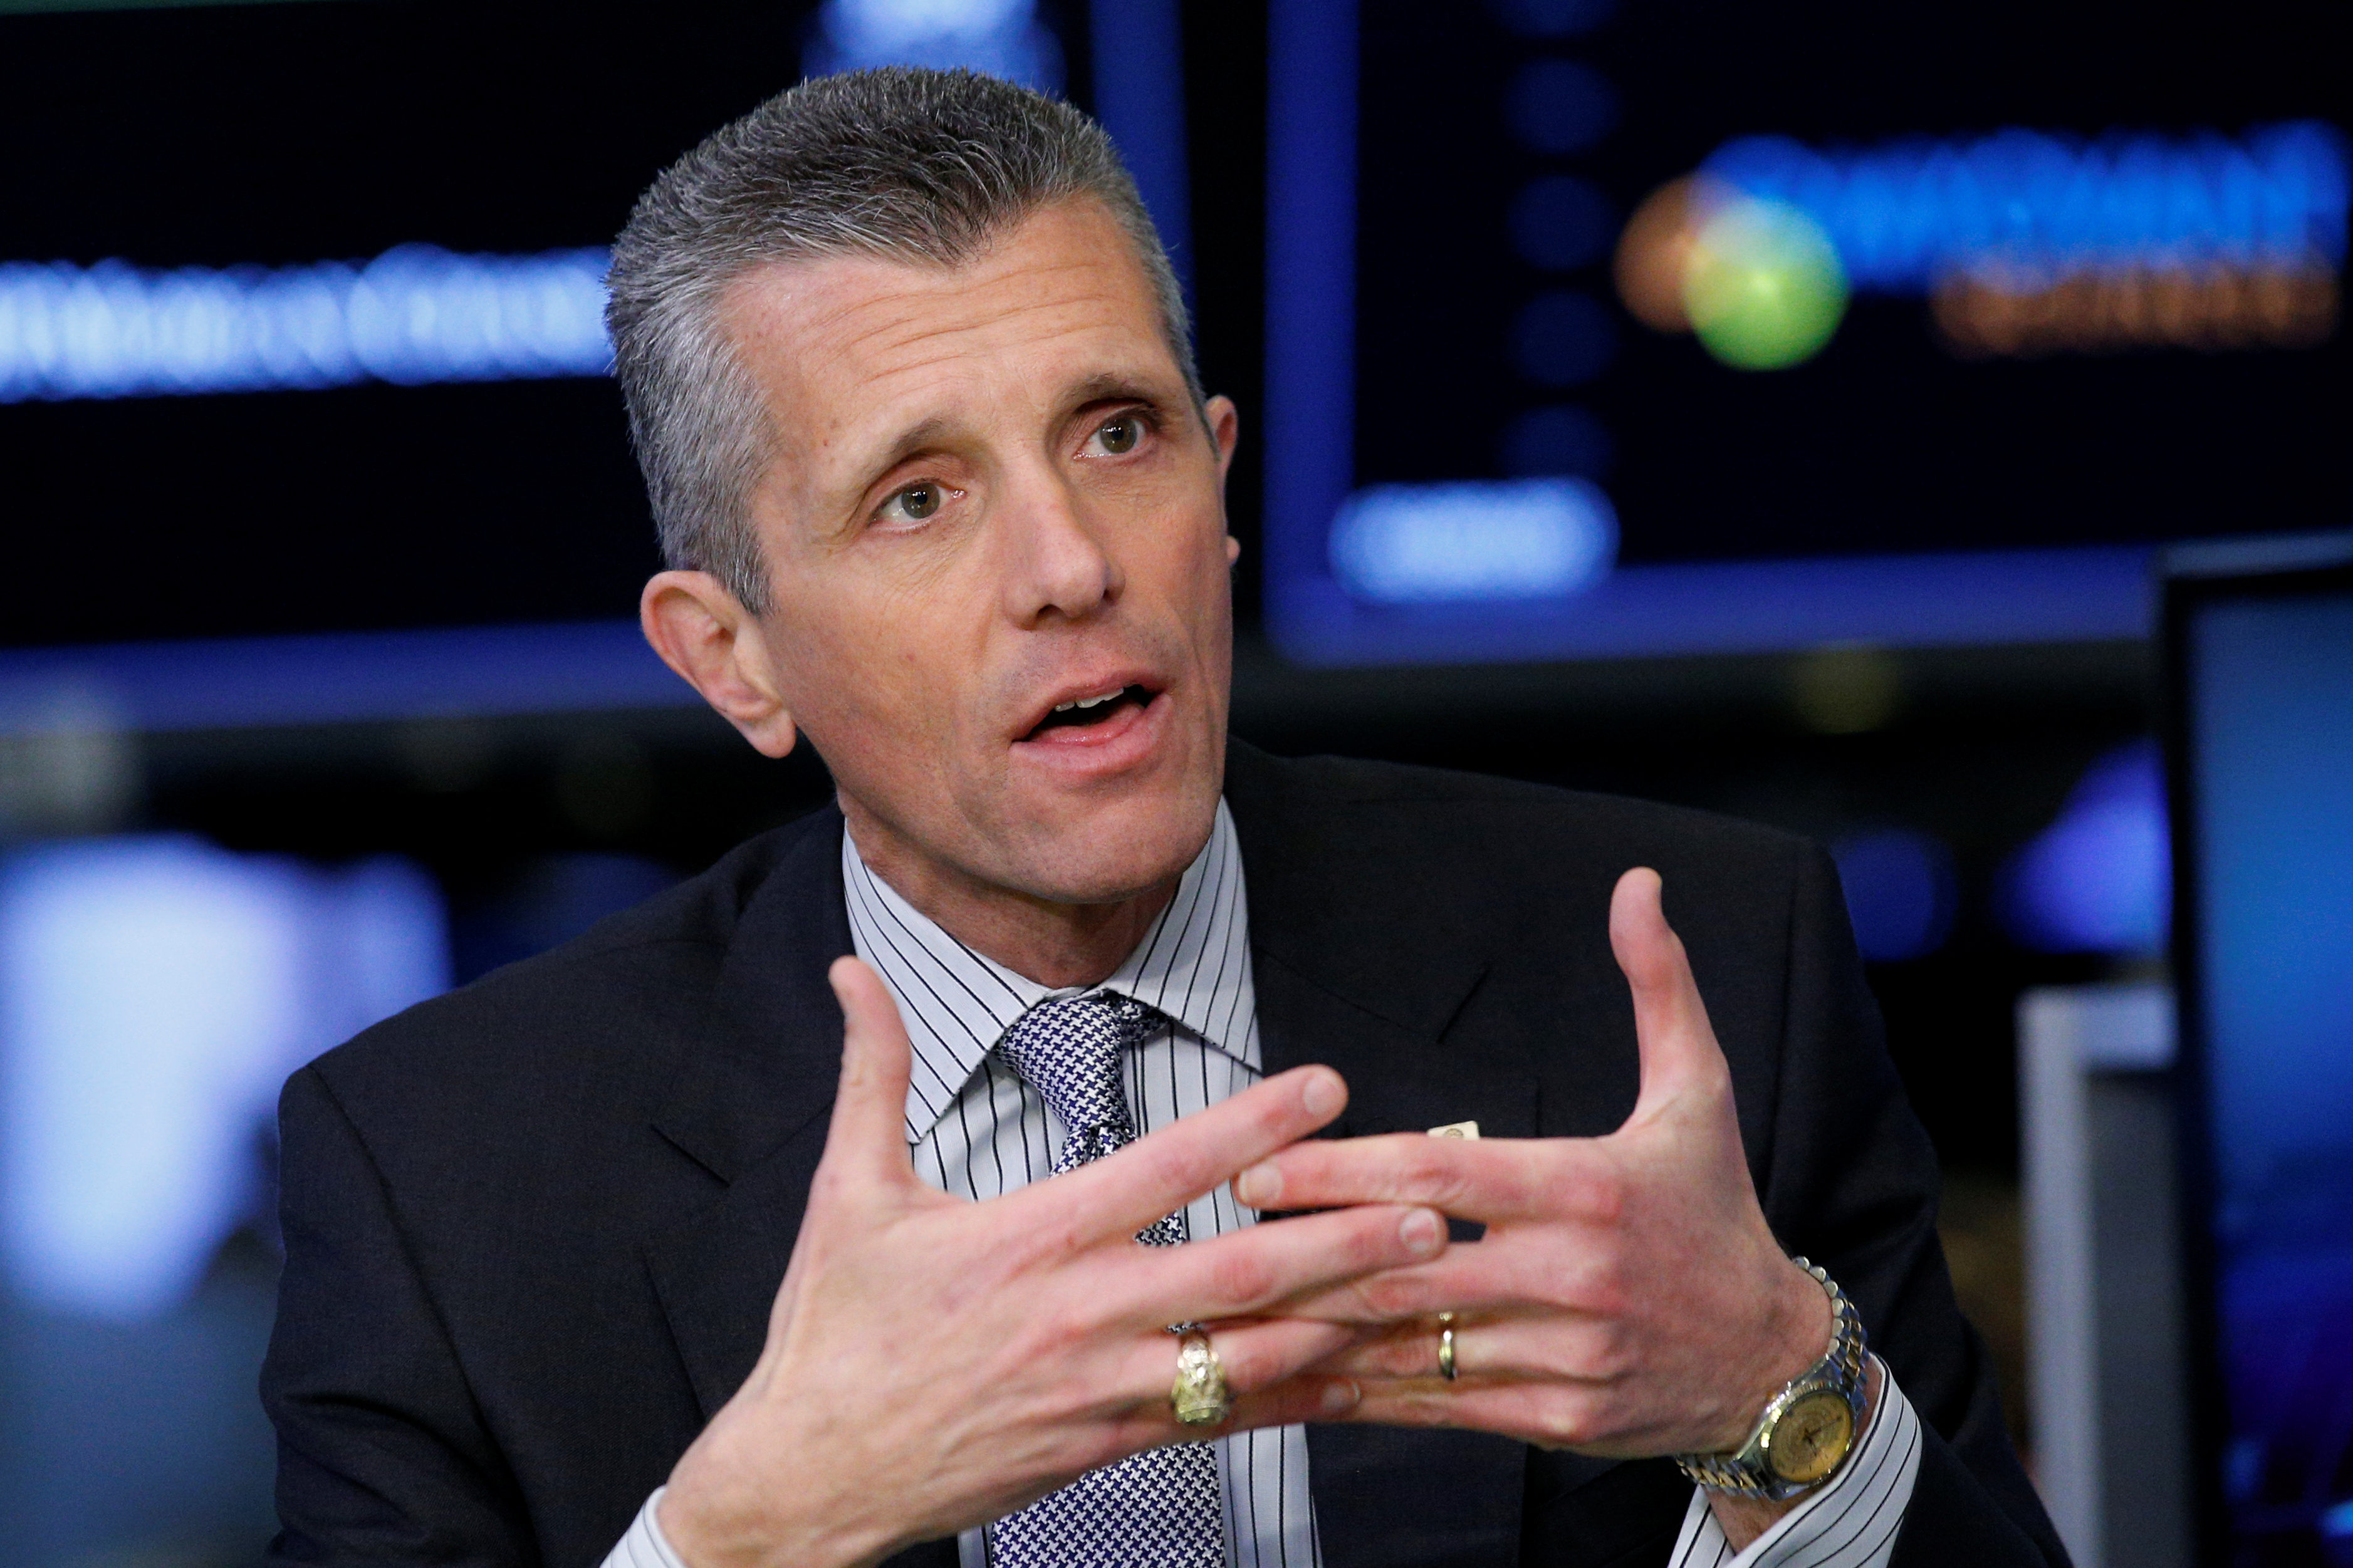 David Cordani, president and CEO of CIGNA Corp., appears on CNBC at the NYSE in New York